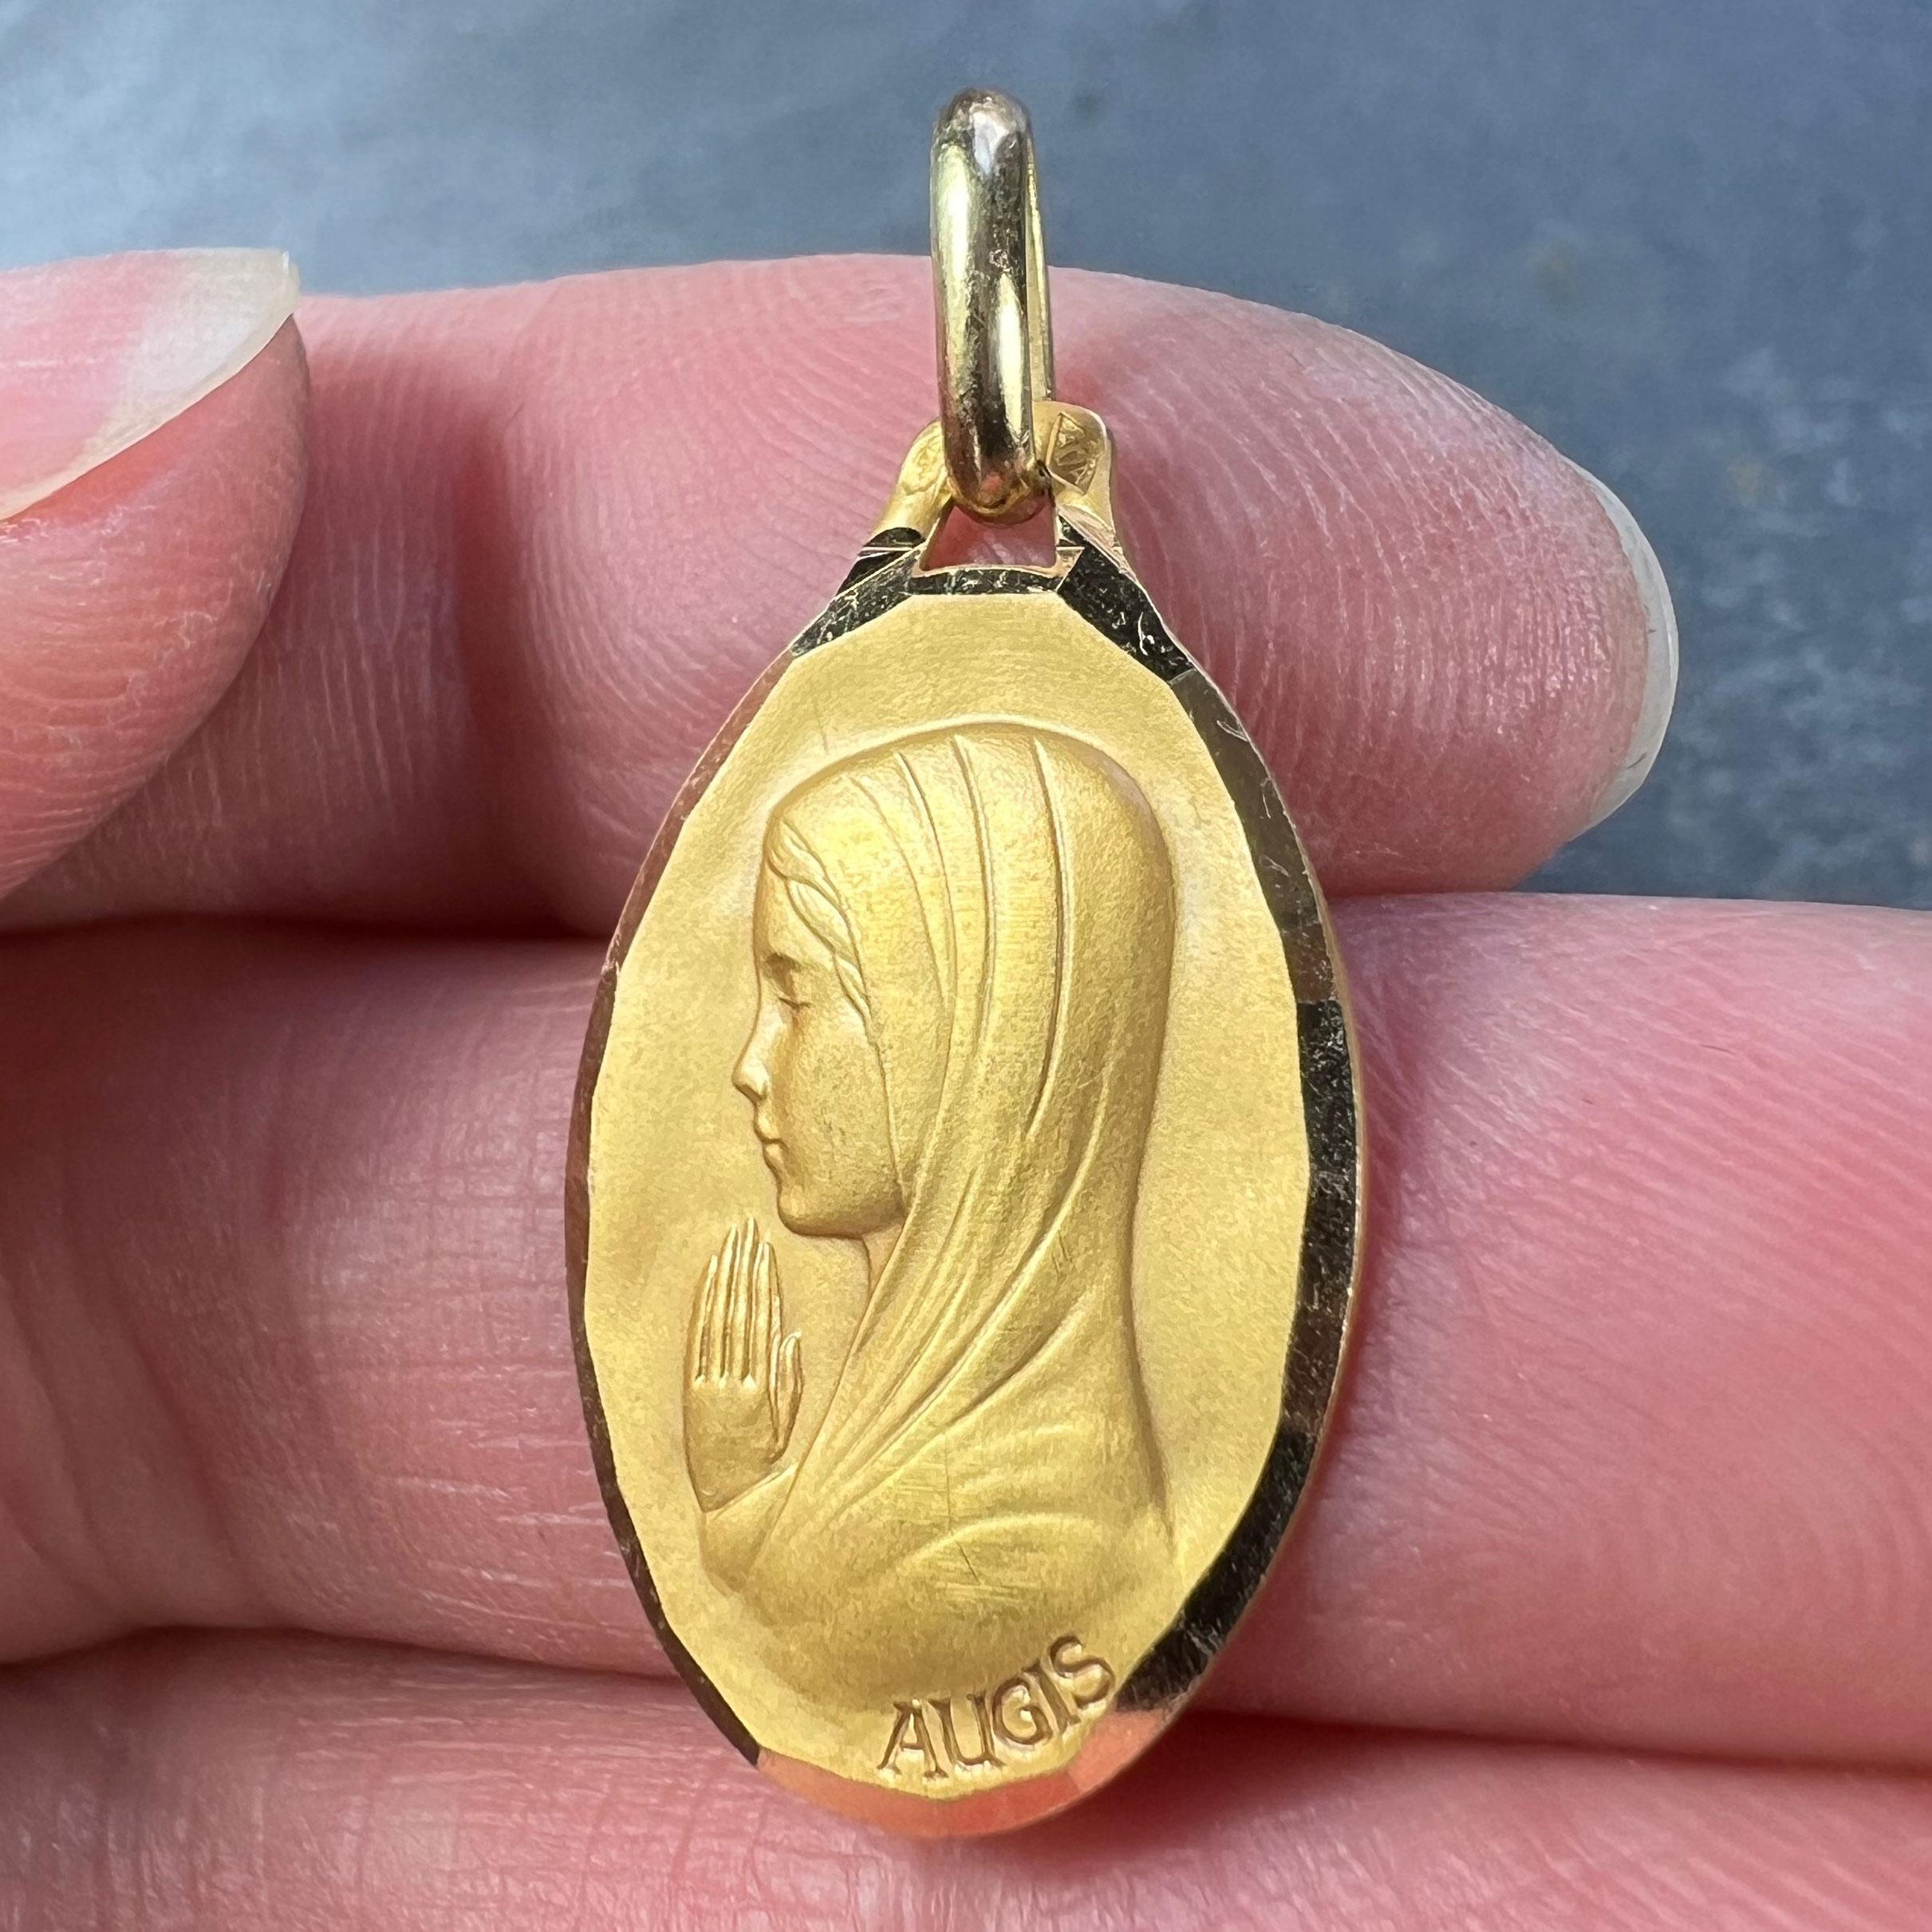 French Augis Virgin Mary 18K Yellow Gold Medal Pendant For Sale 2